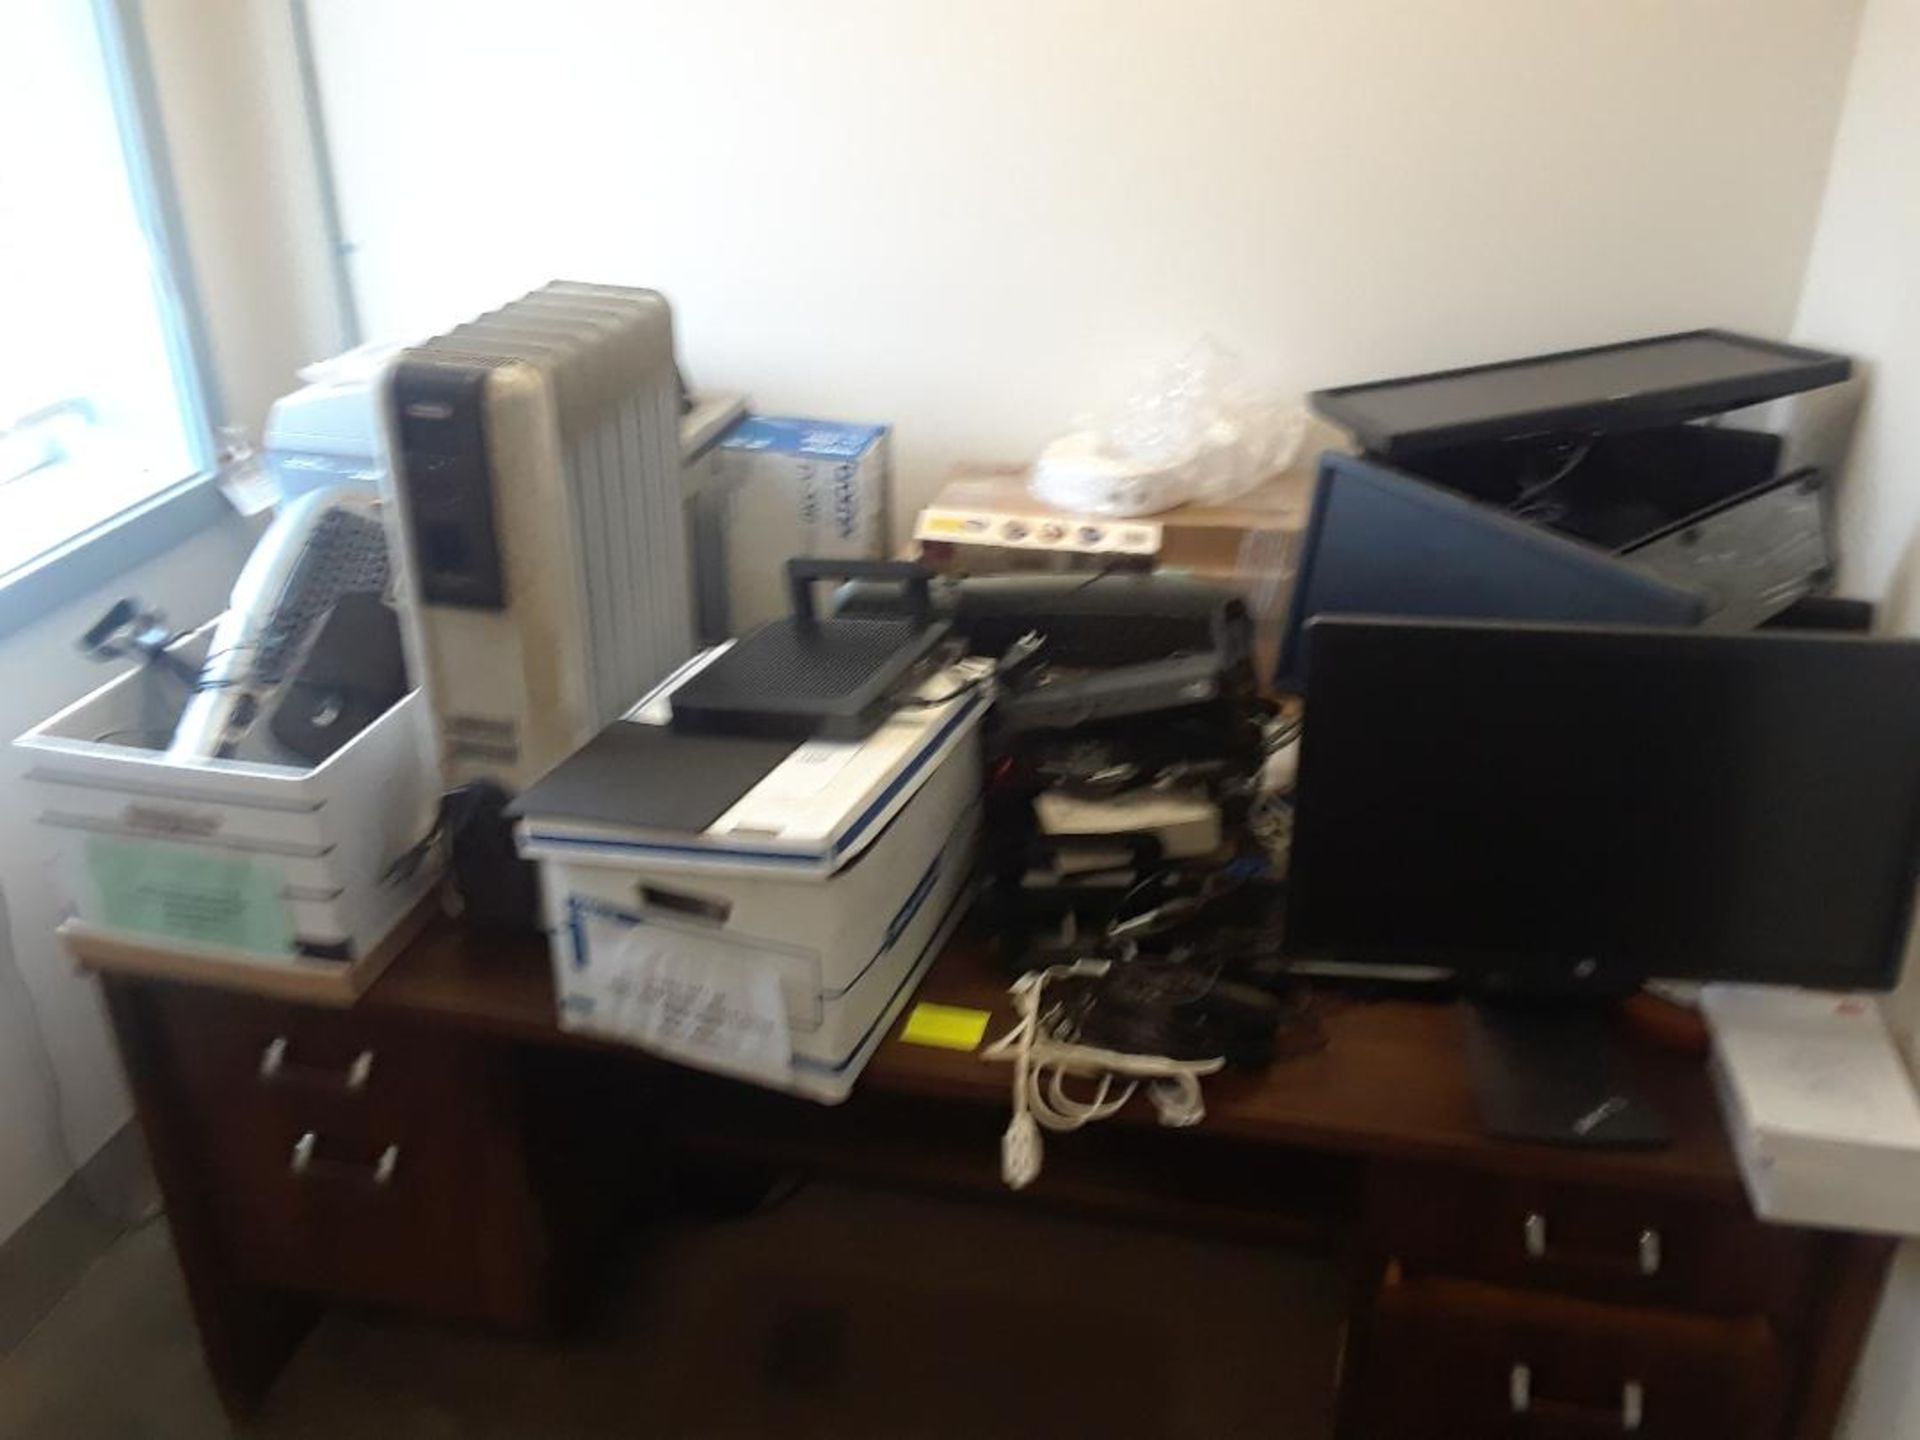 LOT OFFICE FURNITURE & EQUIPMENT CONTENTS OF ROOM DESK, CHAIRS, & MONITORS